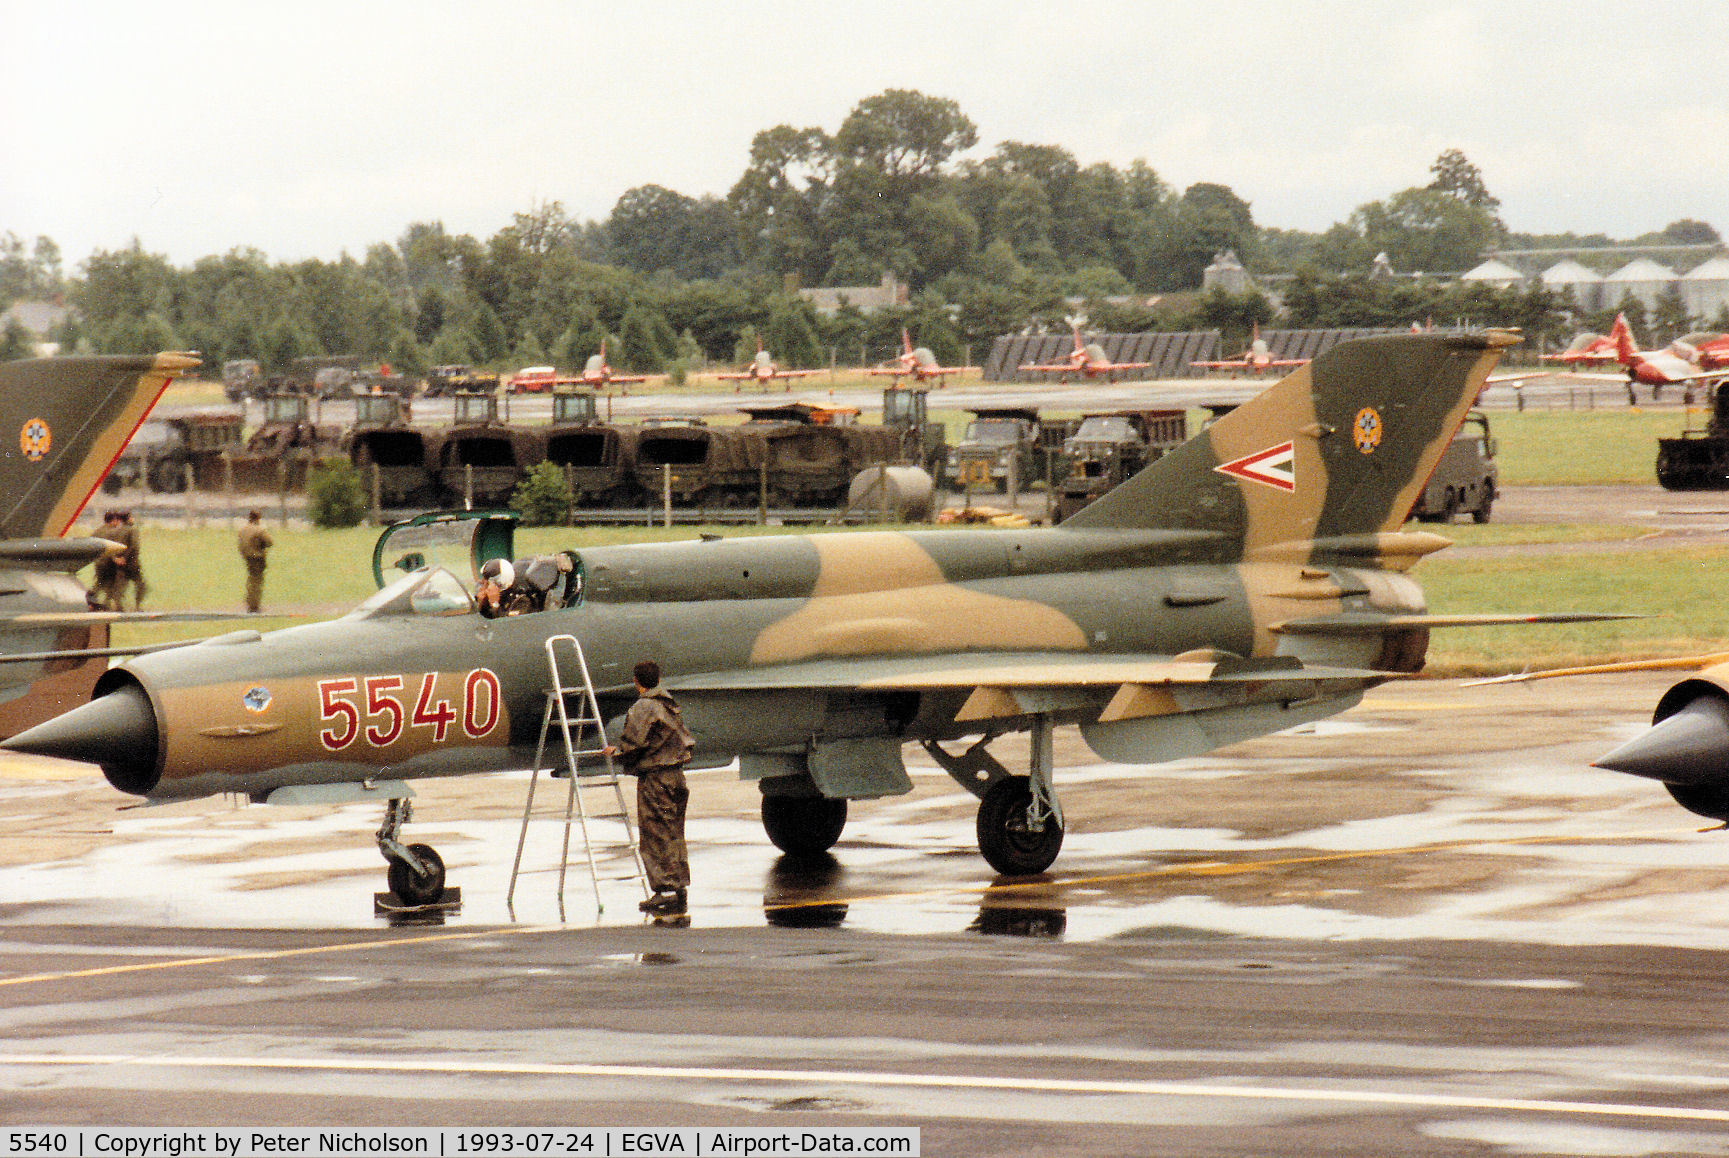 5540, Mikoyan-Gurevich MiG-21bis C/N 75035540, MiG-21 Fishbed of the Sky Hussars Hungarian Air Force display team on the flight-line at the 1993 Intnl Air Tattoo at RAF Fairford.